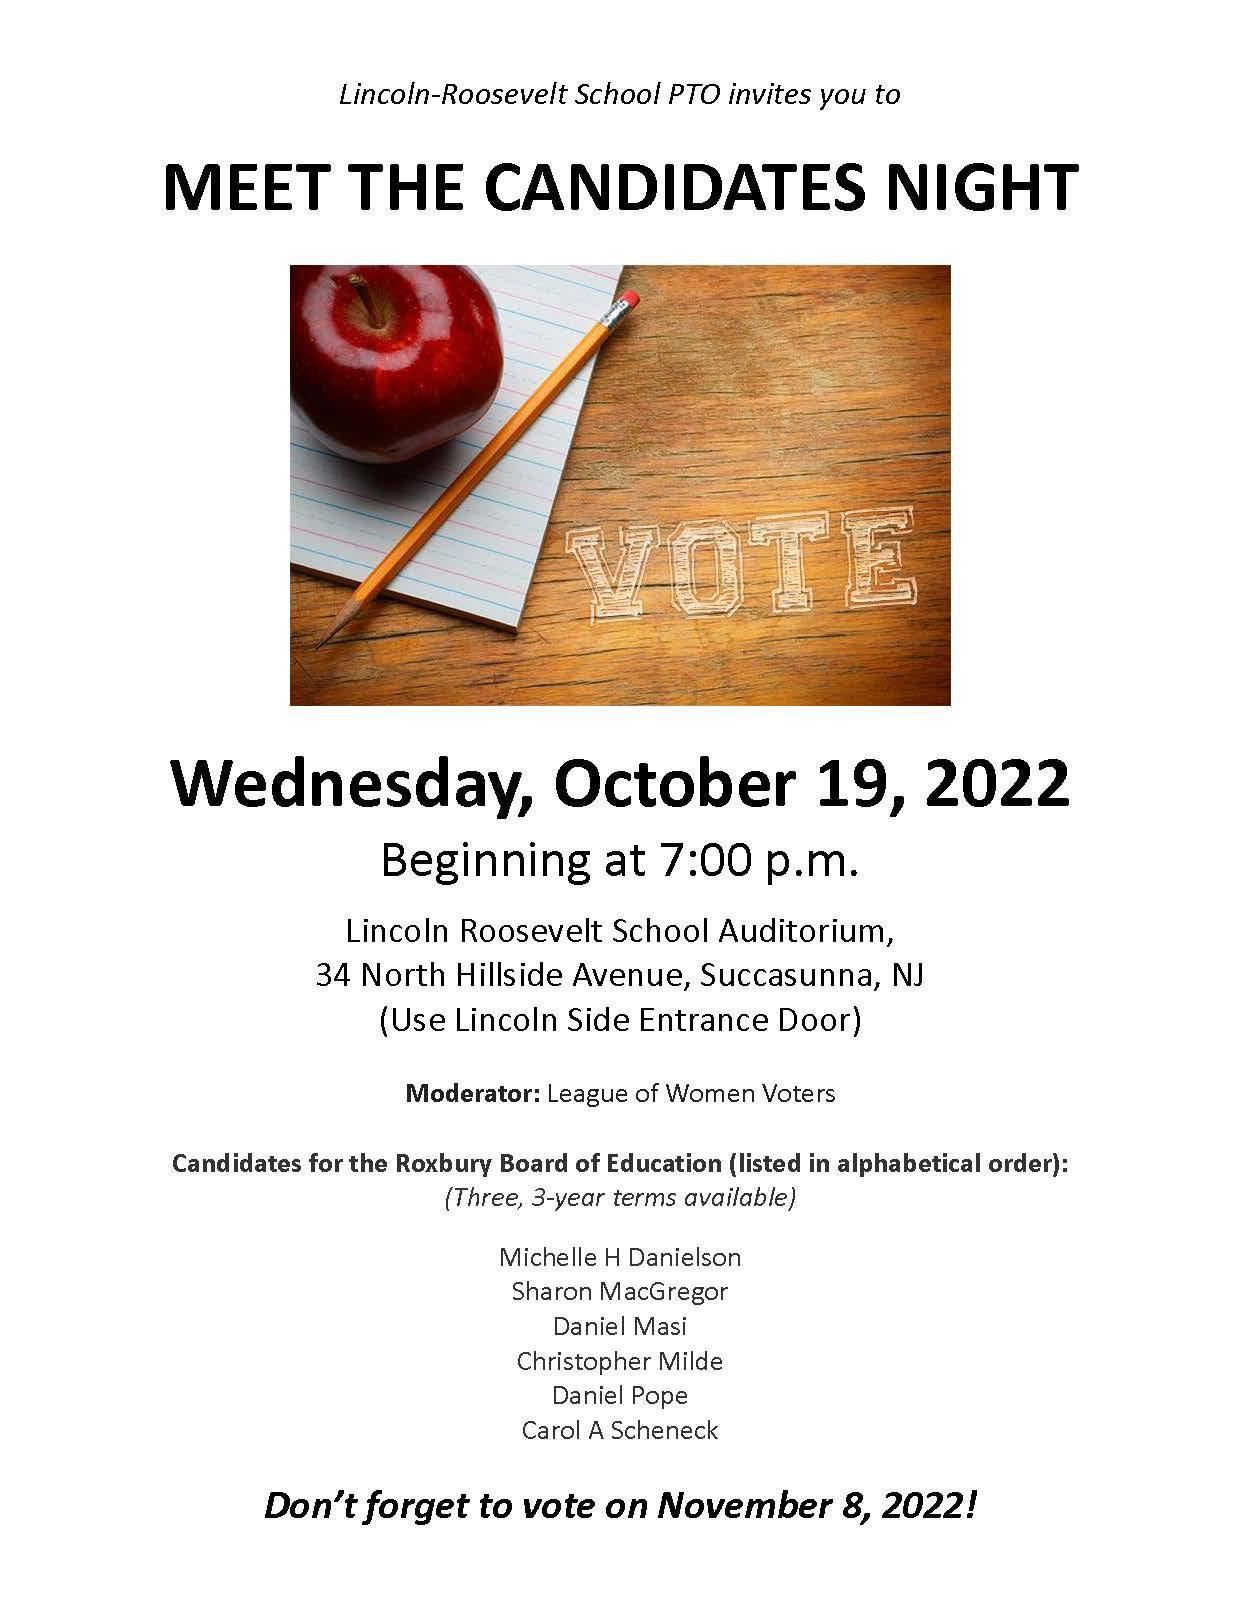  LRS PTO hosts Meet the Candidates Night on 10/18 at 7pm for the candidates running for the BOE